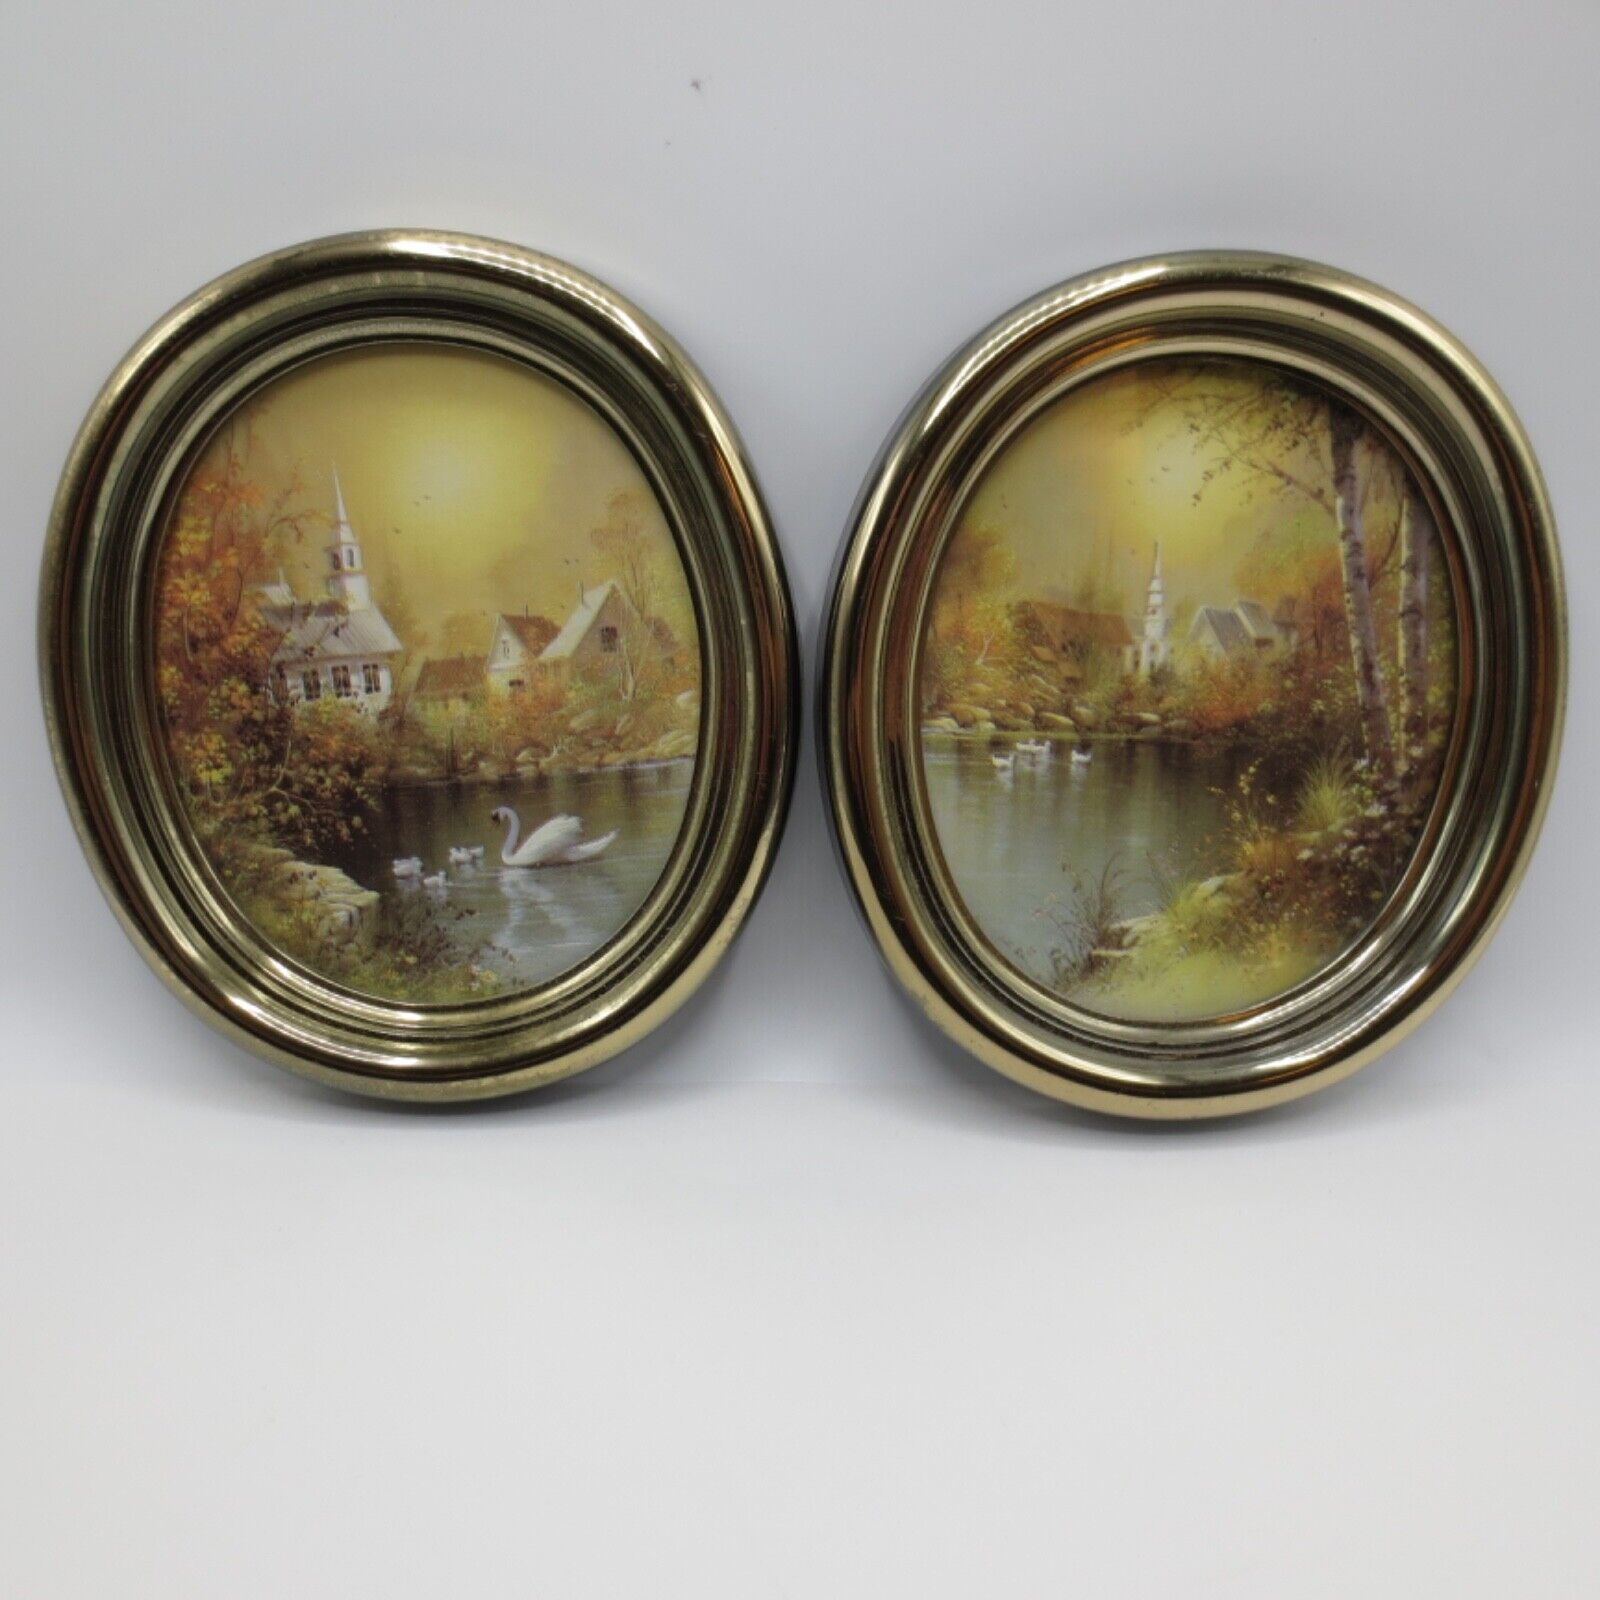 2 Vintage Homco Gold Oval Framed Church Swan Lake Wall Art Pictures #9663 Decor